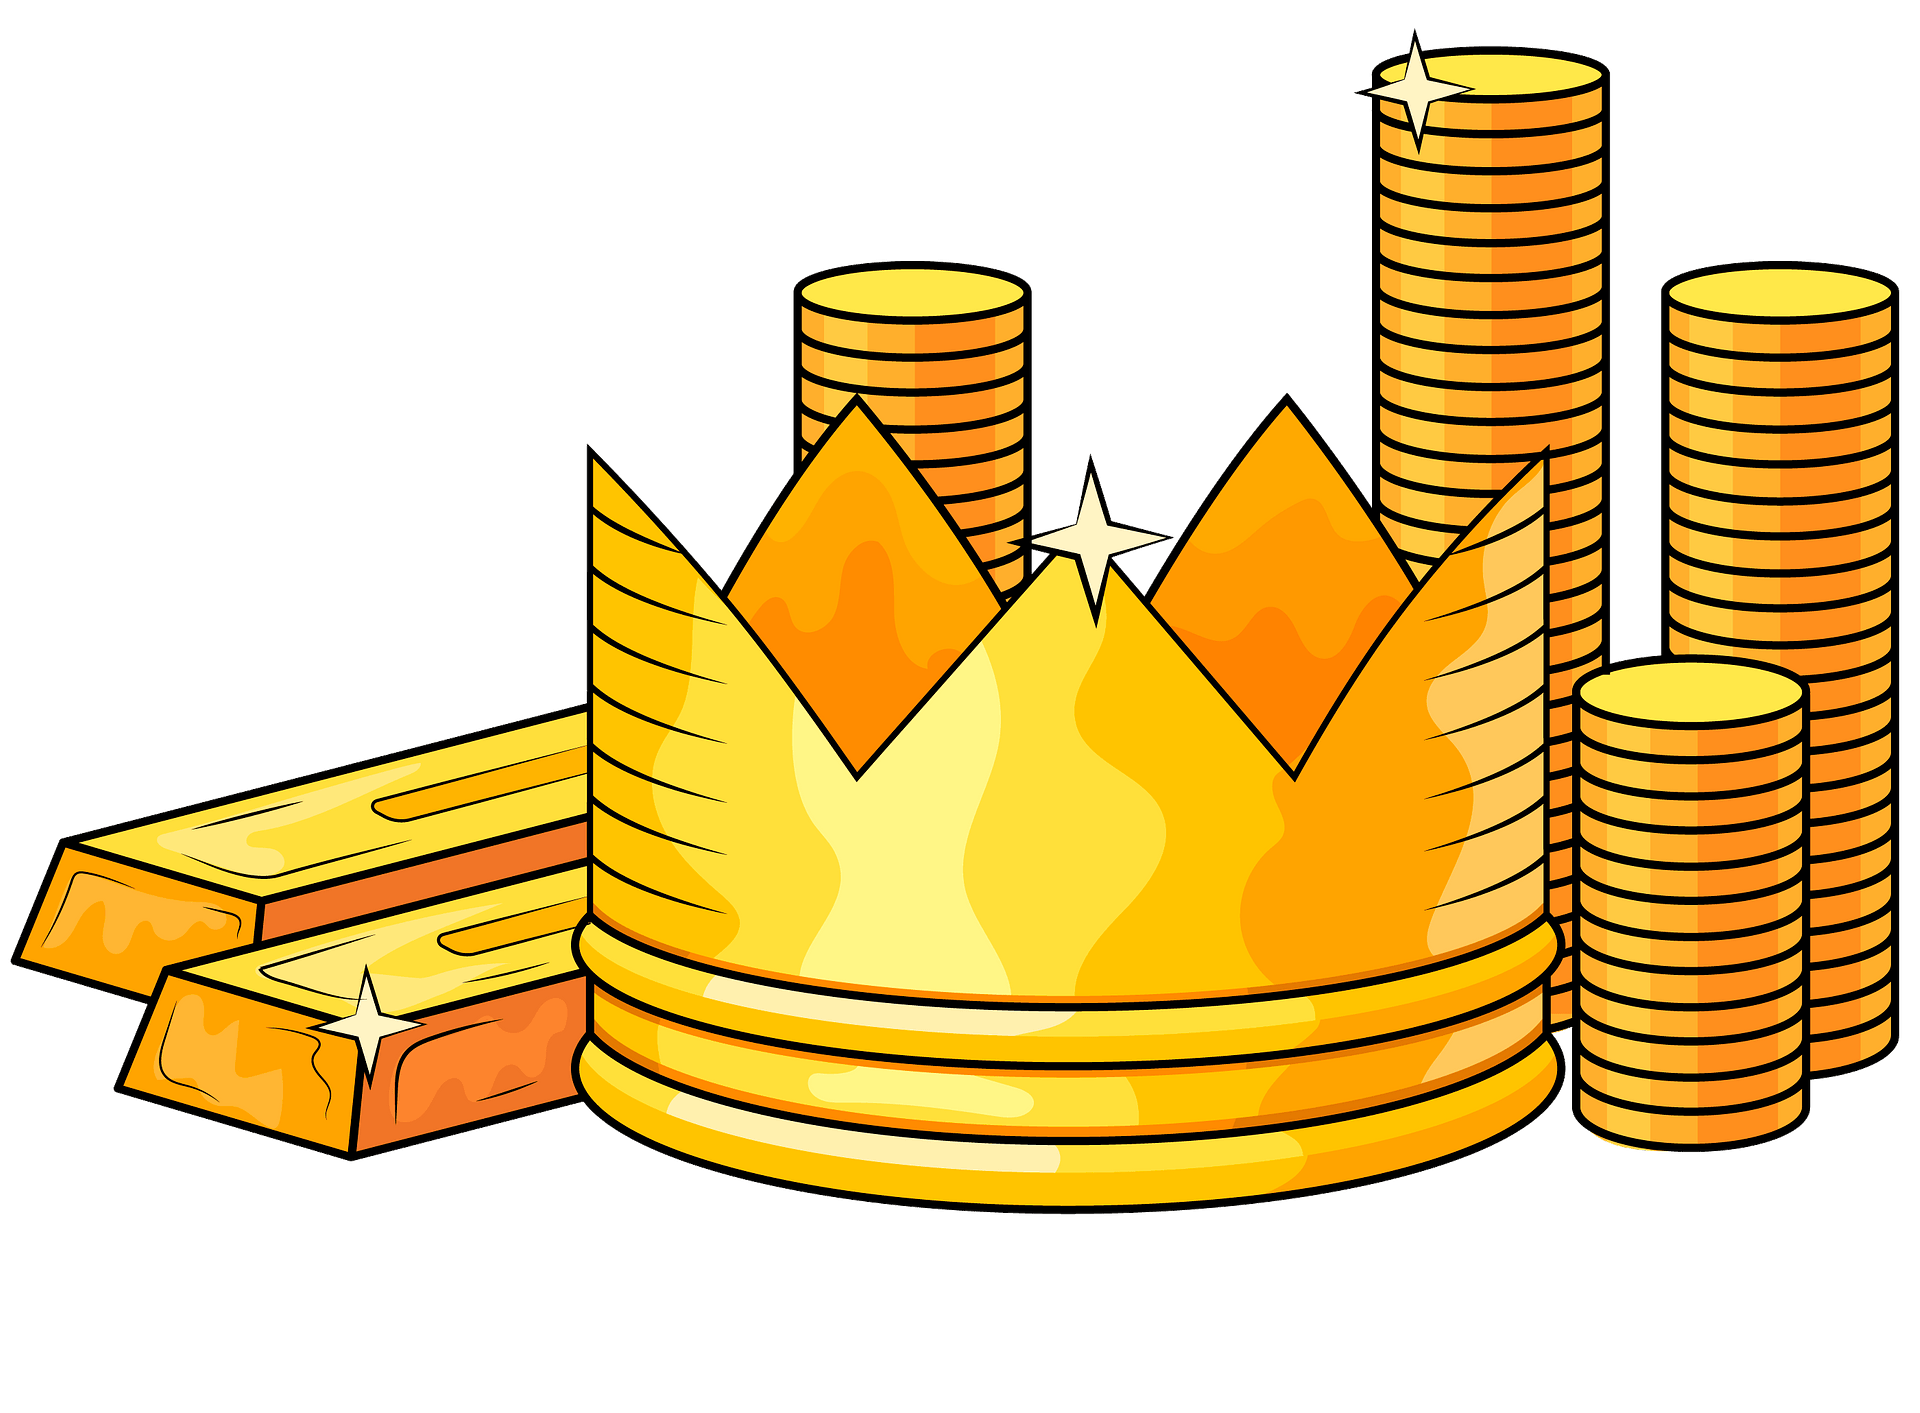 Clipart featuring a gold crown, gold coins, and gold bars all together.